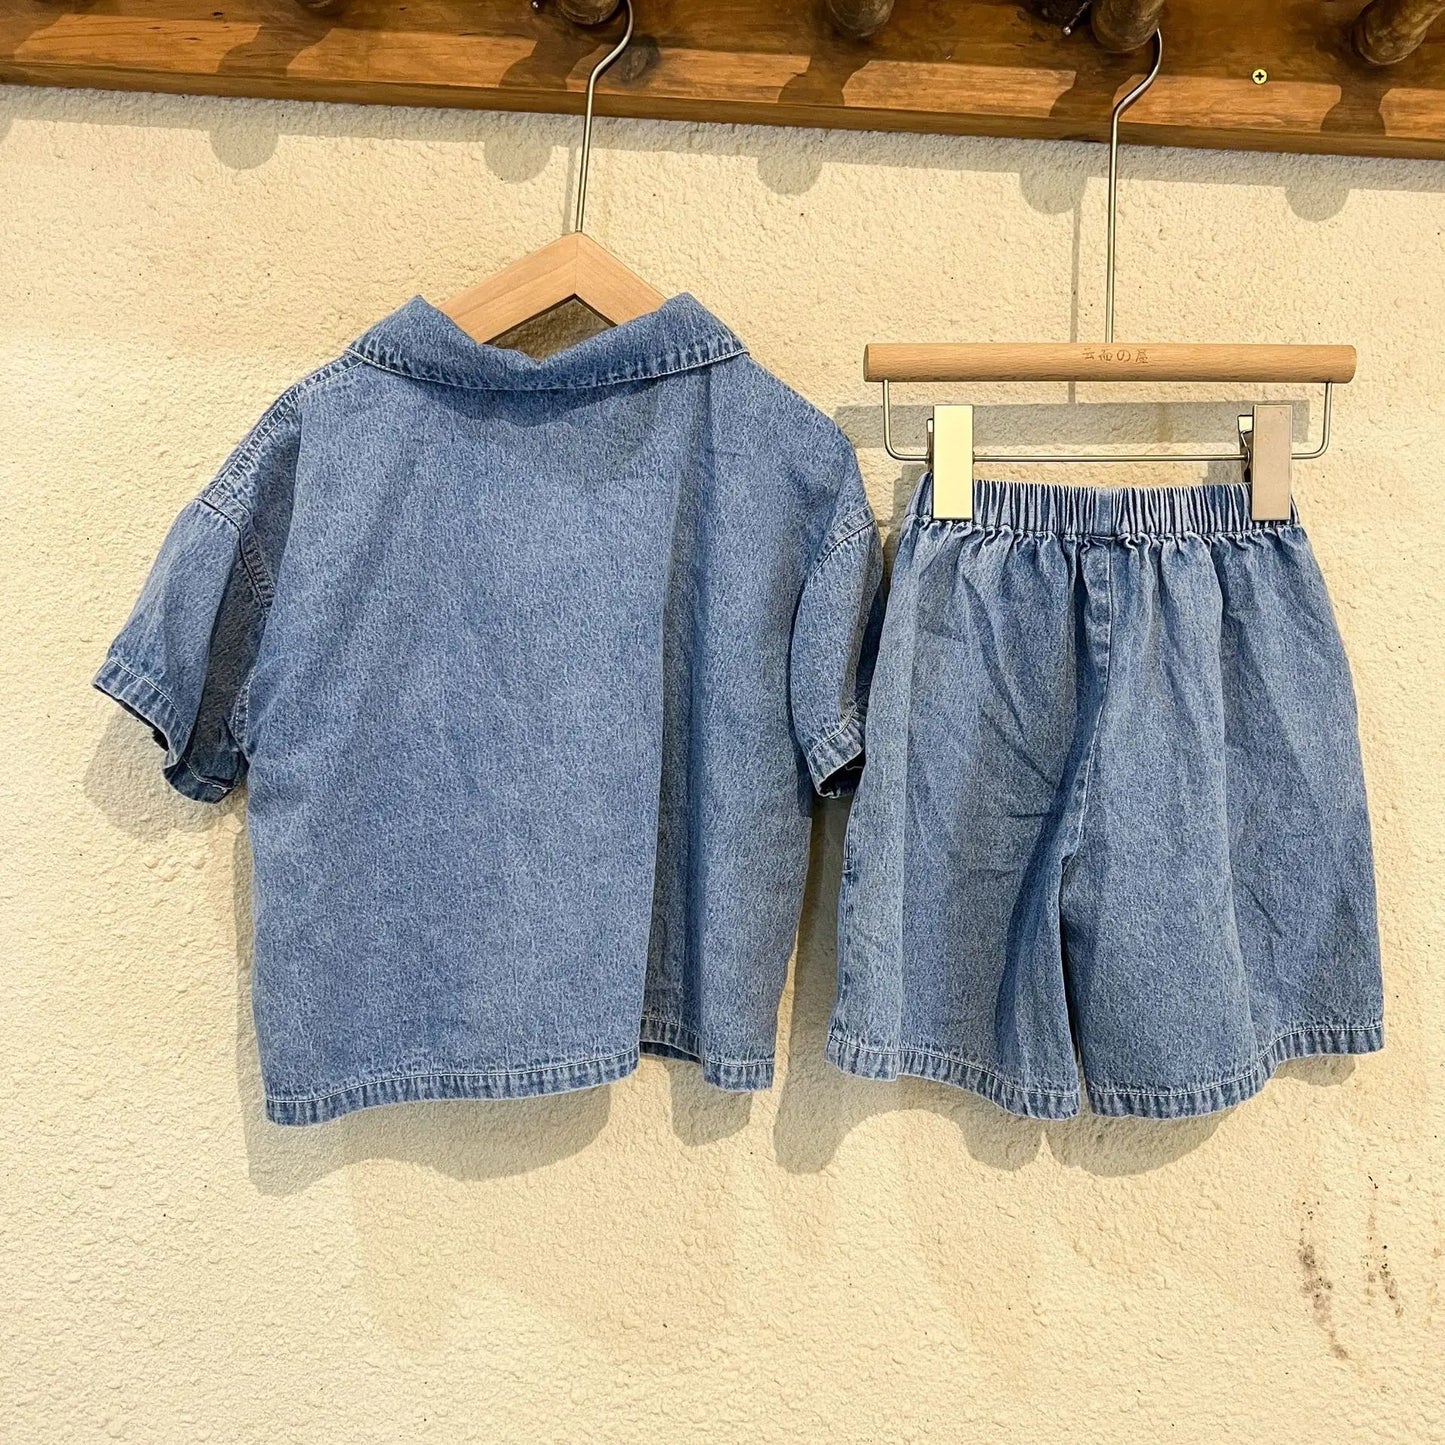 Denim Zip Shirt & Shorts Set for Boys - Blue - Ages 9 Months to 10 Years - JAC